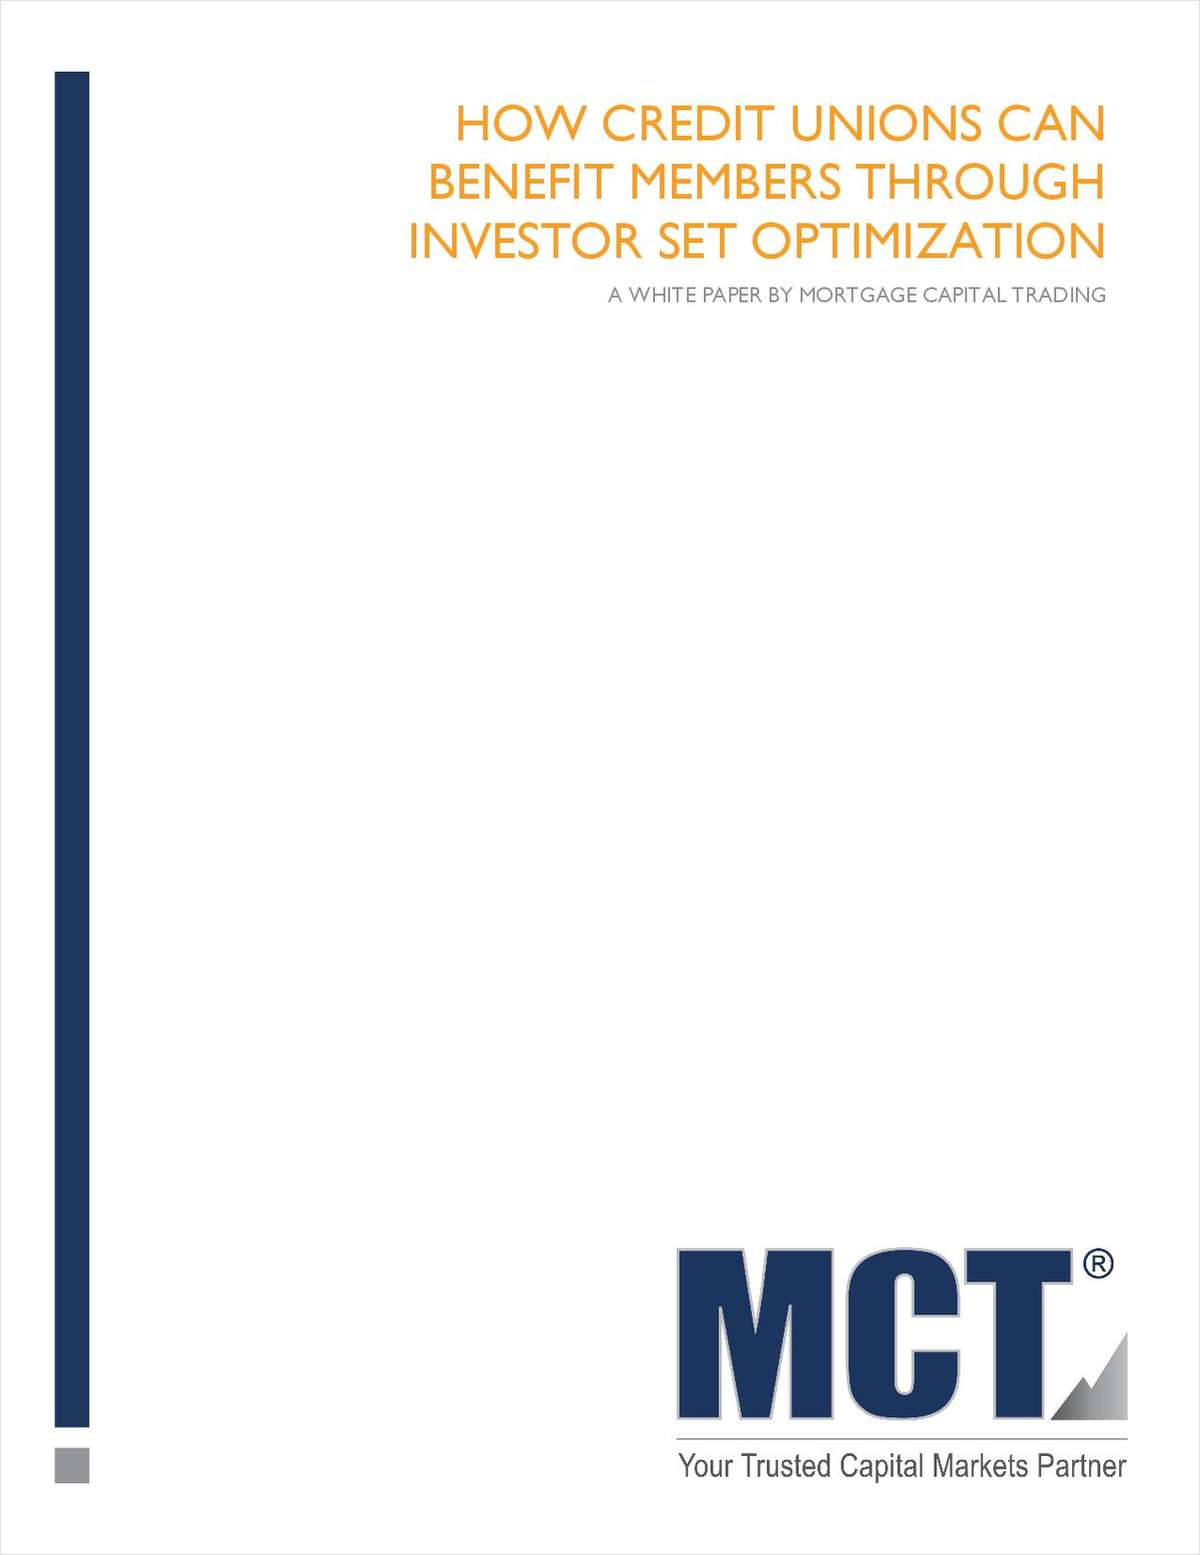 How Credit Unions Can Benefit Members Through Investor Set Optimization link